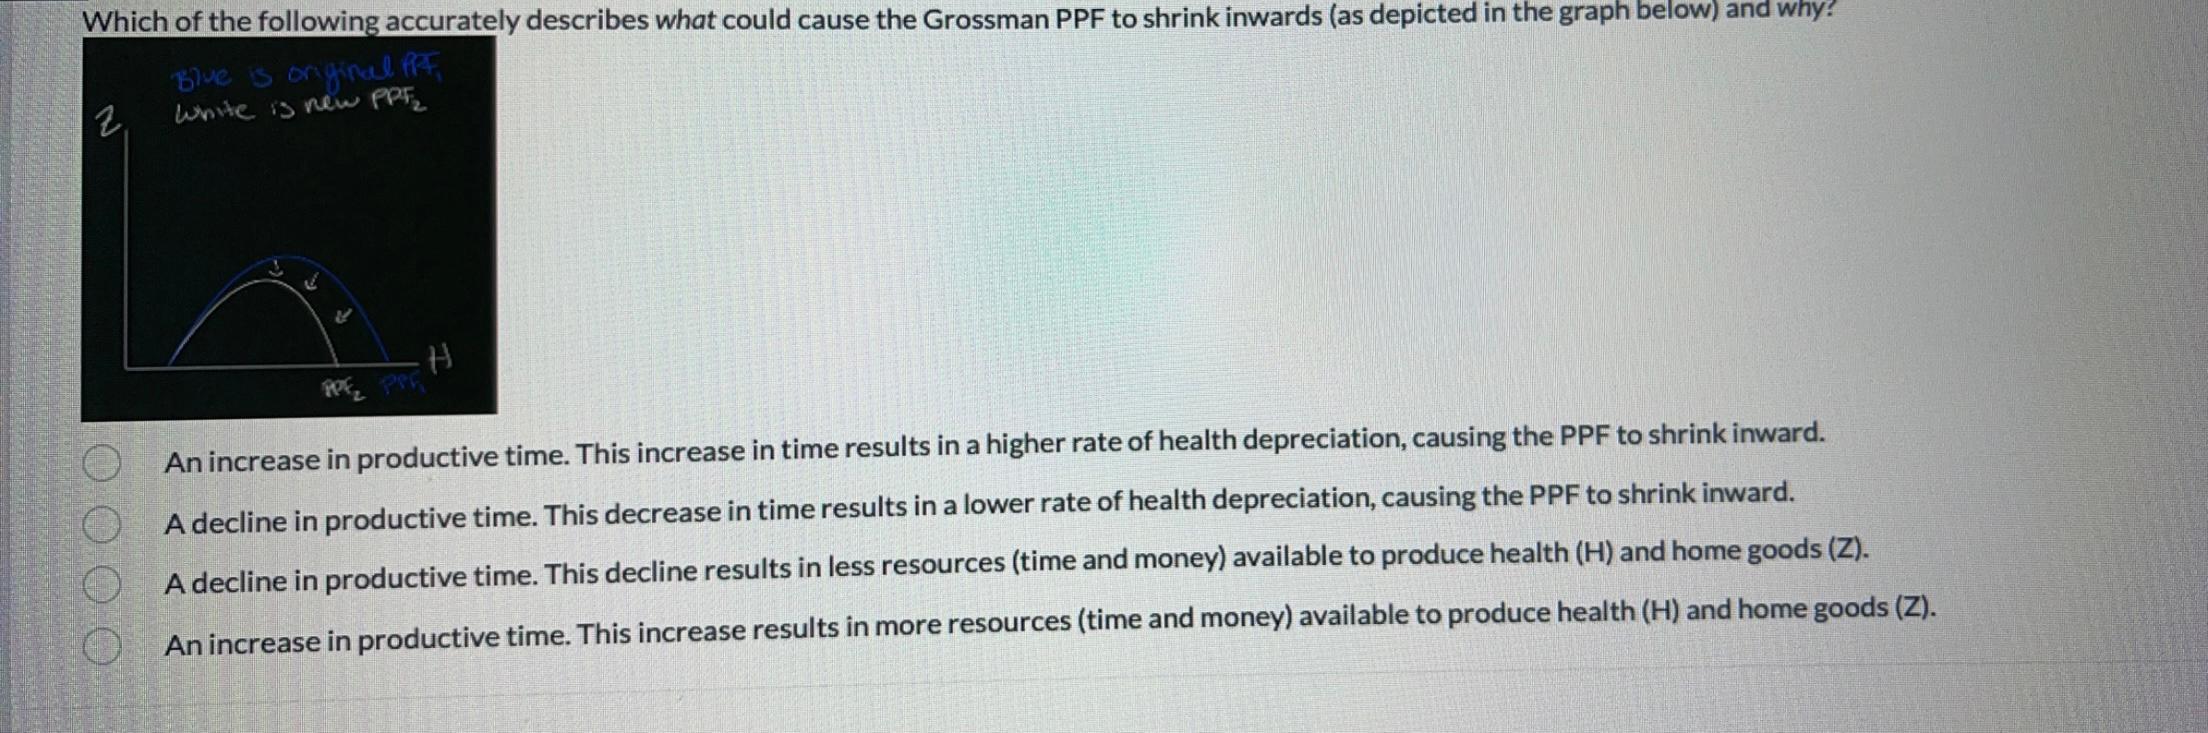 Which of the following accurately describes what could cause the Grossman PPF to shrink inwards (as depicted